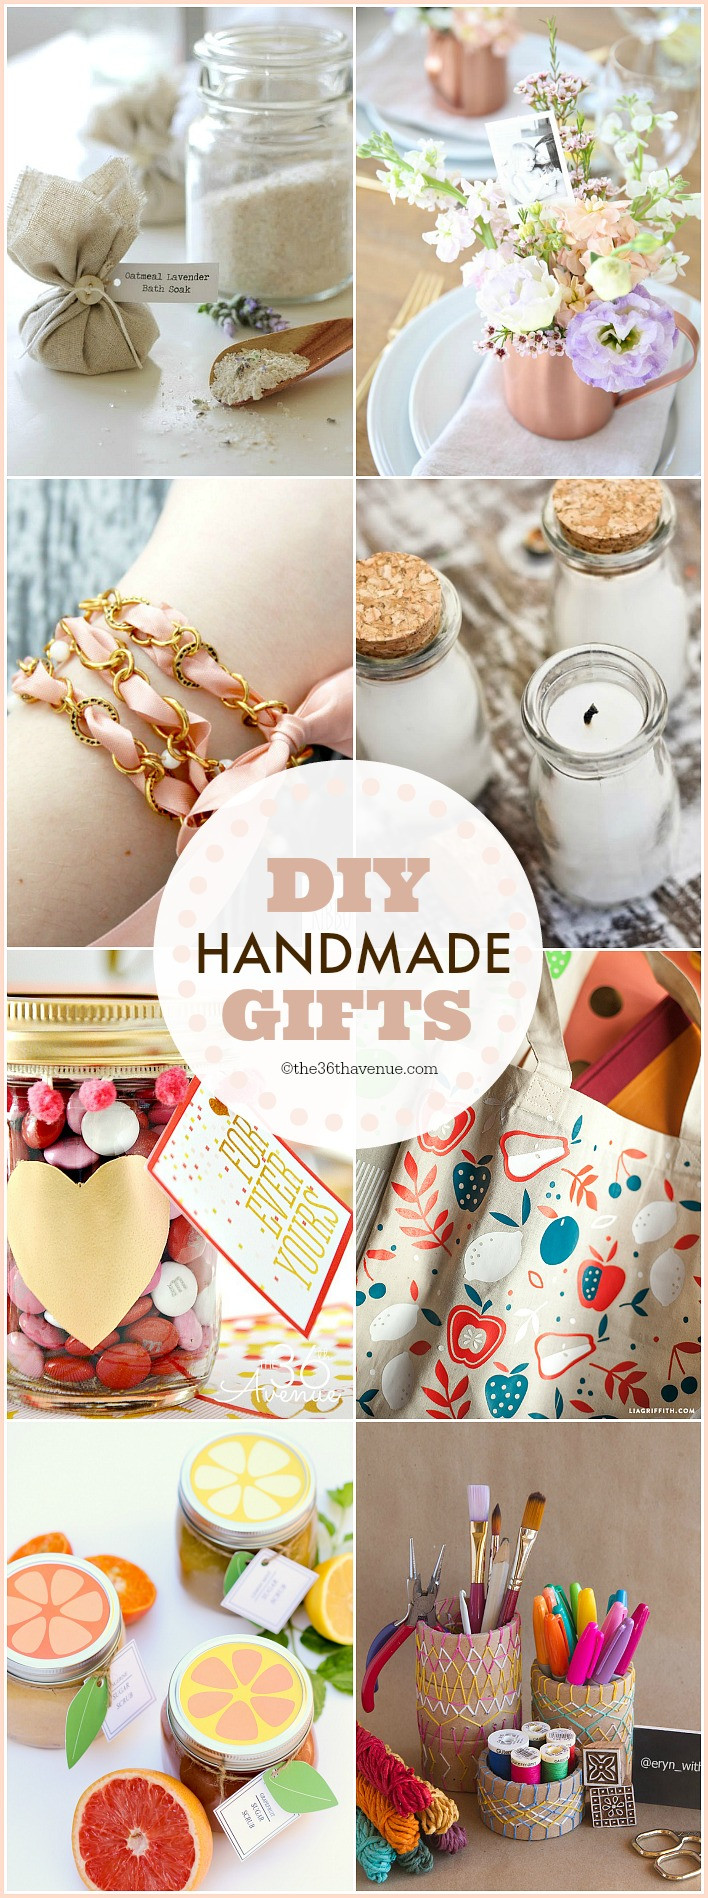 Christmas Gift Ideas To Make
 100 Handmade Gifts Under Five Dollars The 36th AVENUE